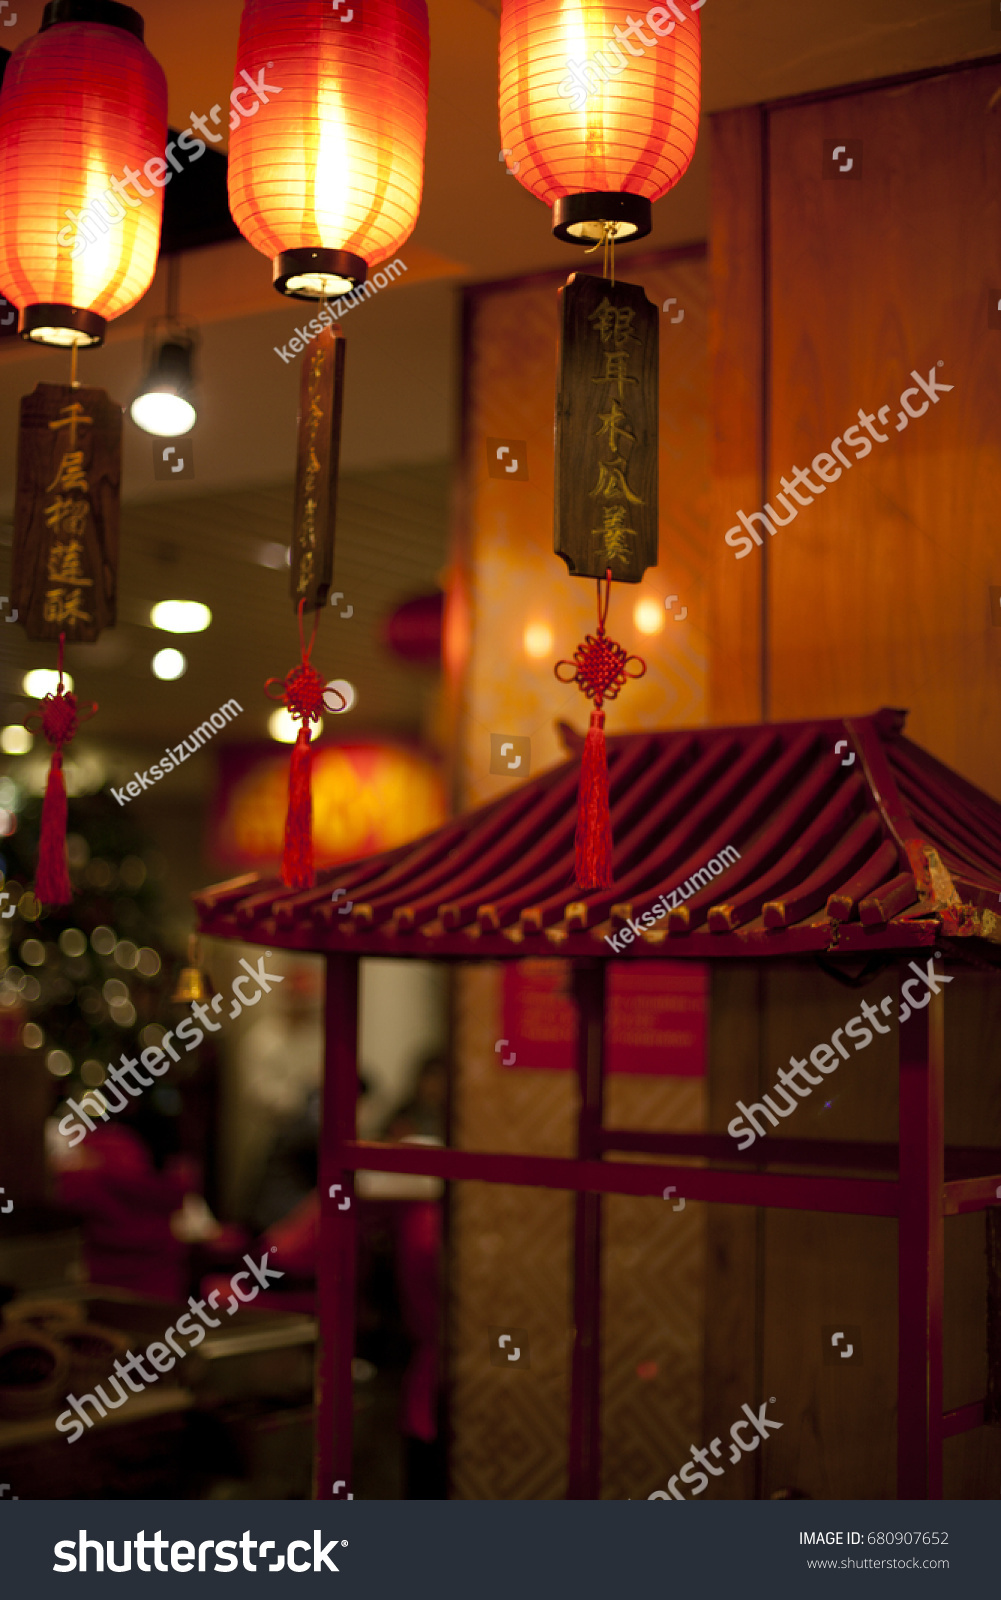 Chinese lanterns with the inscription "welcome" ,Inscription below "wish well-being! Beijing ,2016 #680907652